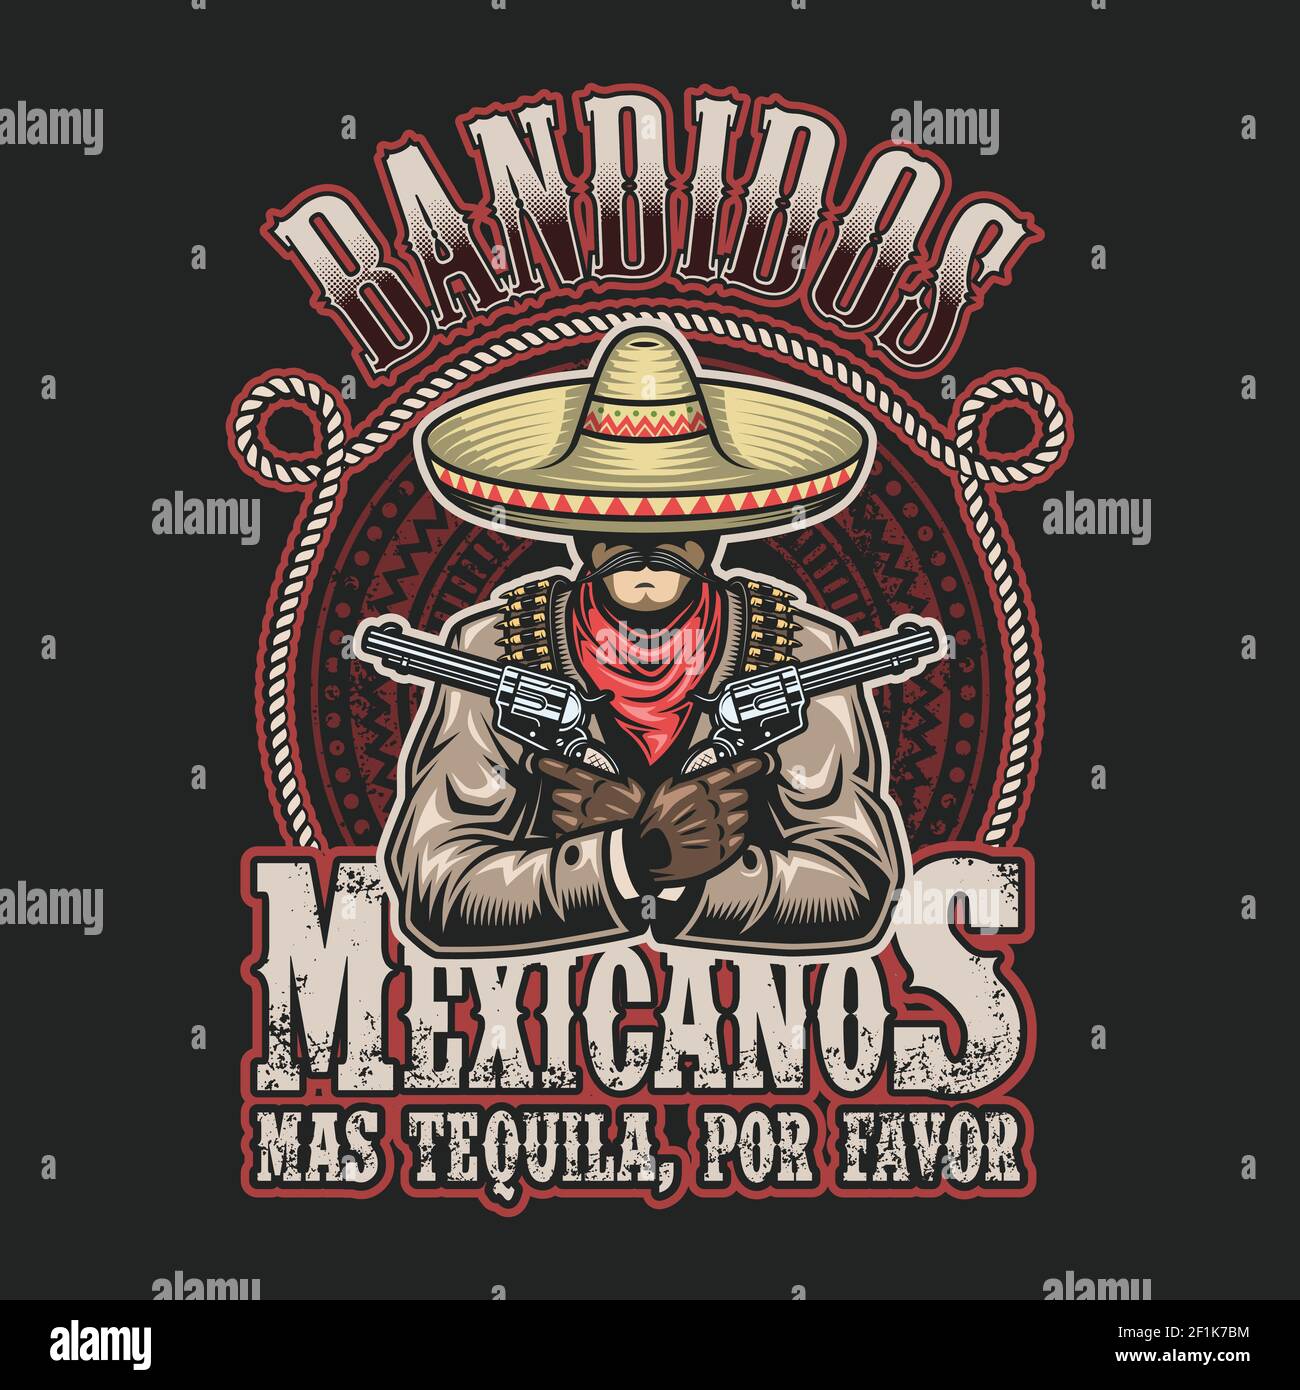 Wanted Dead Alive Silhouette Mexican Gunslinger Stock Vector